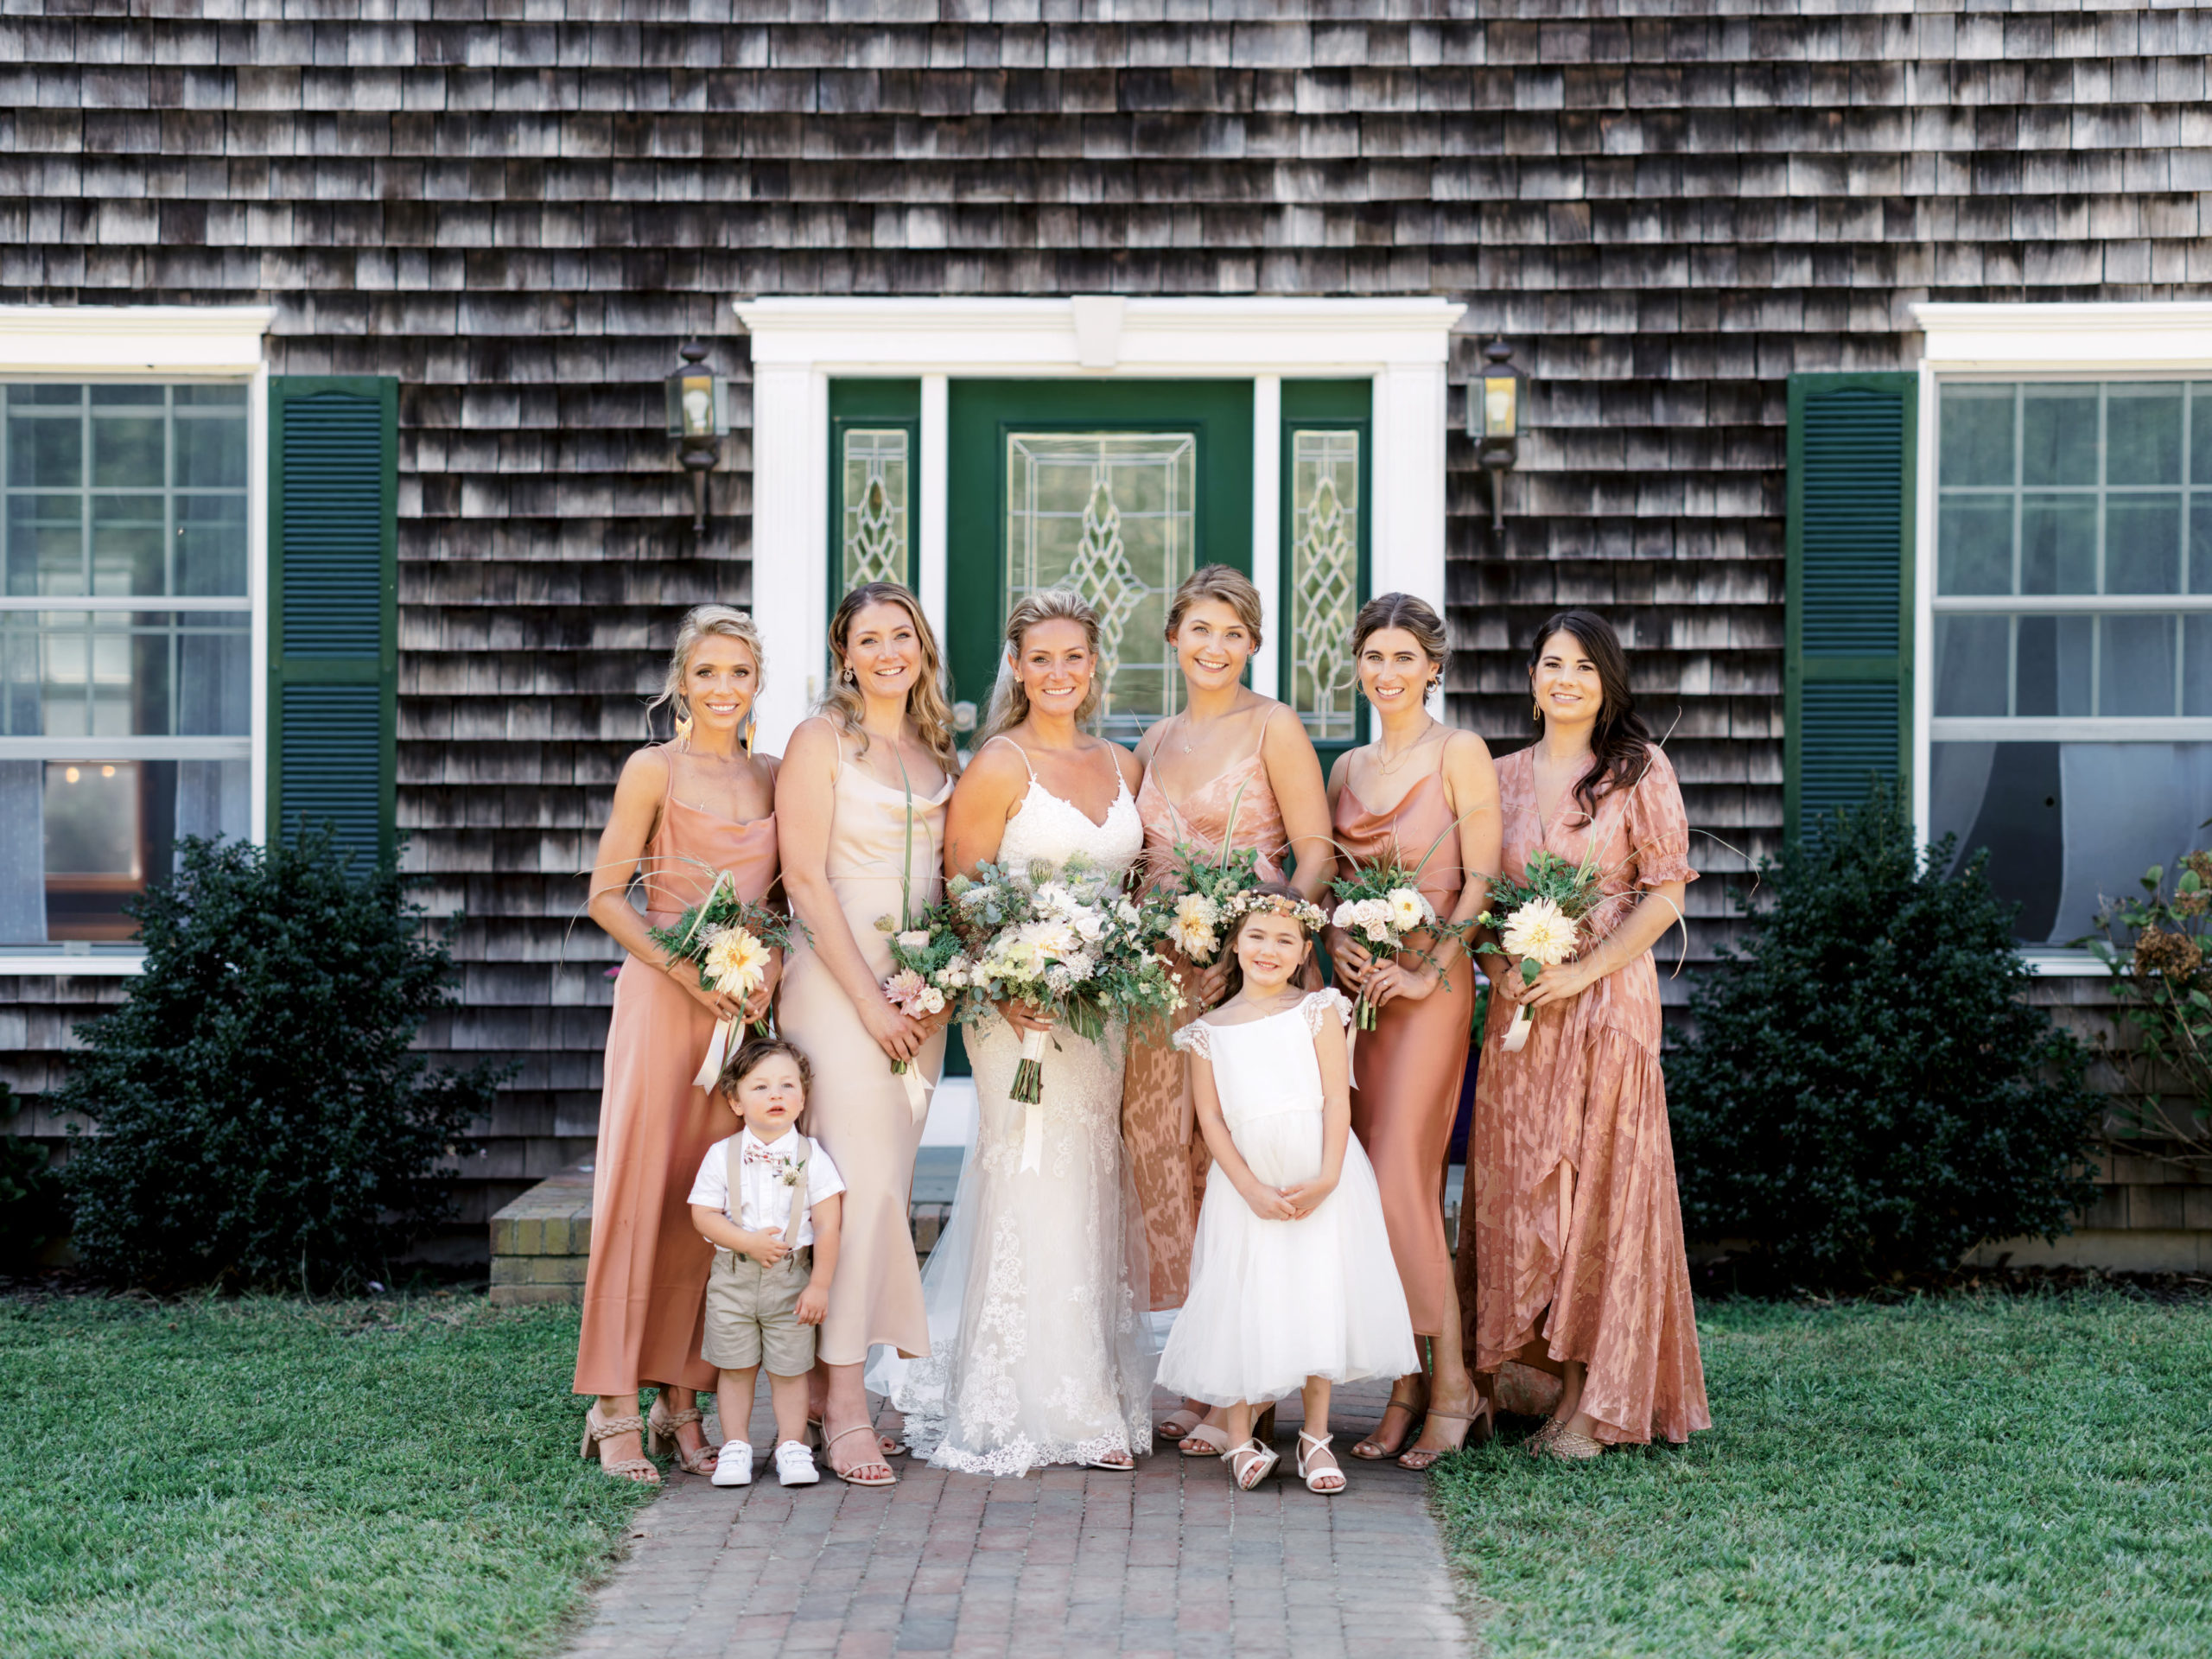 The bridesmaids in their 2022 Bridesmaid Dress. Editorial image by Jenny Fu Studio